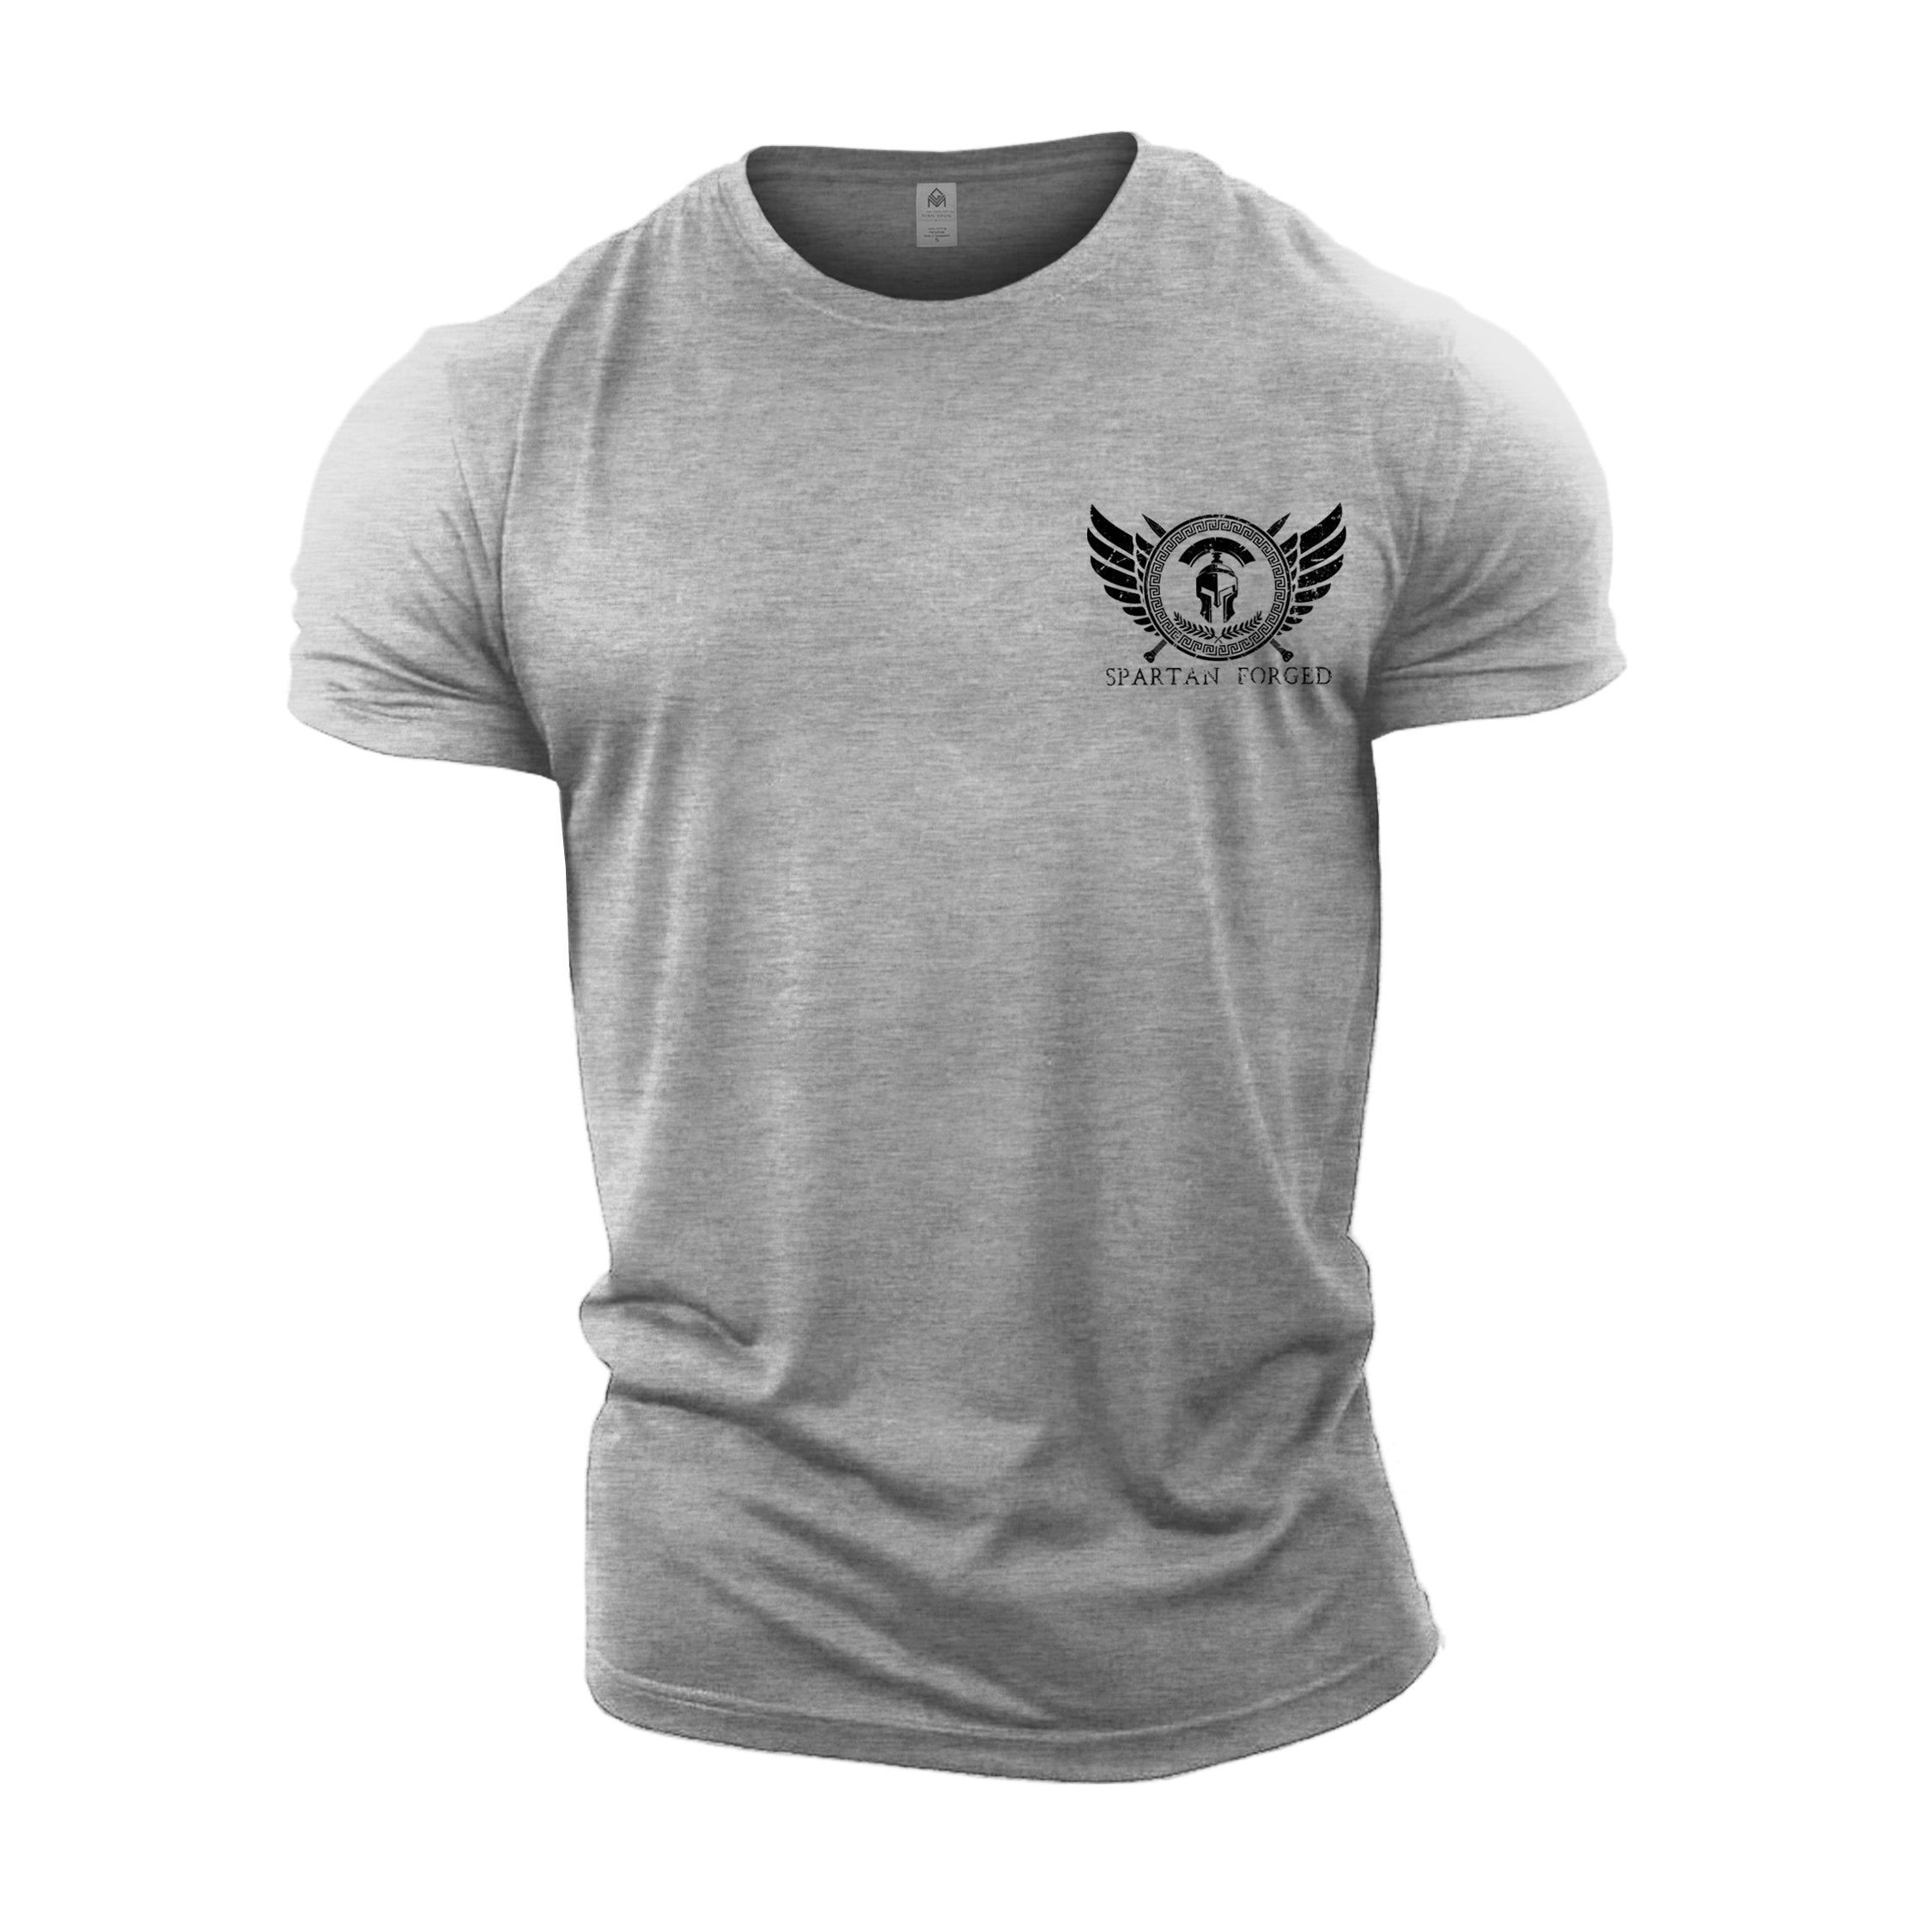 Spartan Wings - Spartan Forged - Gym T-Shirt